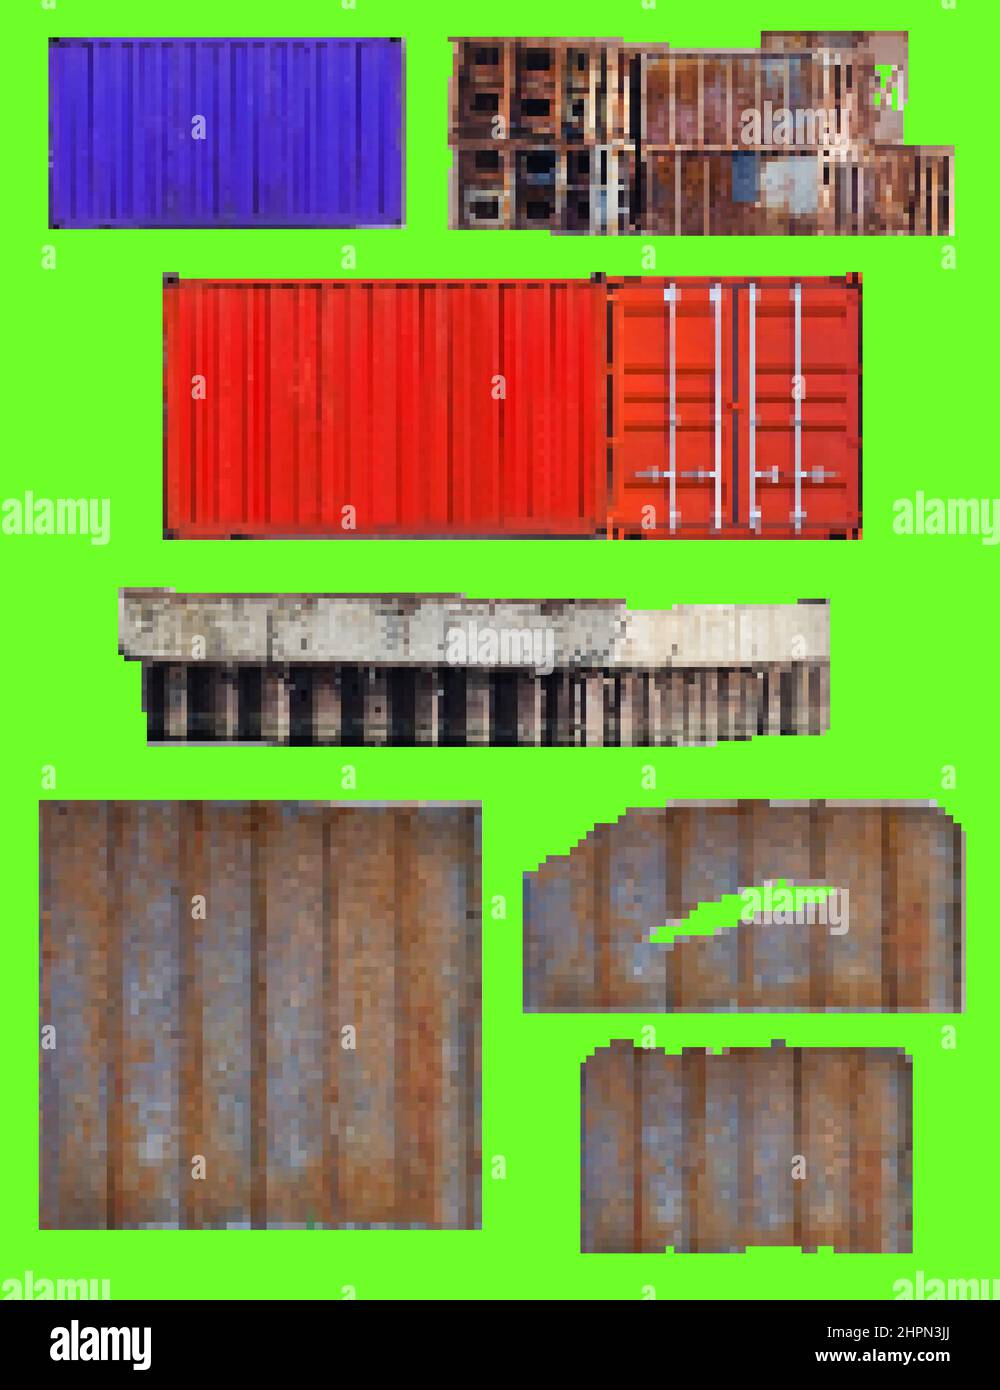 Pixel artwork illustration of metal fence, containers and rusty structure elements on green screen background. 16 bit game clipart. Stock Photo